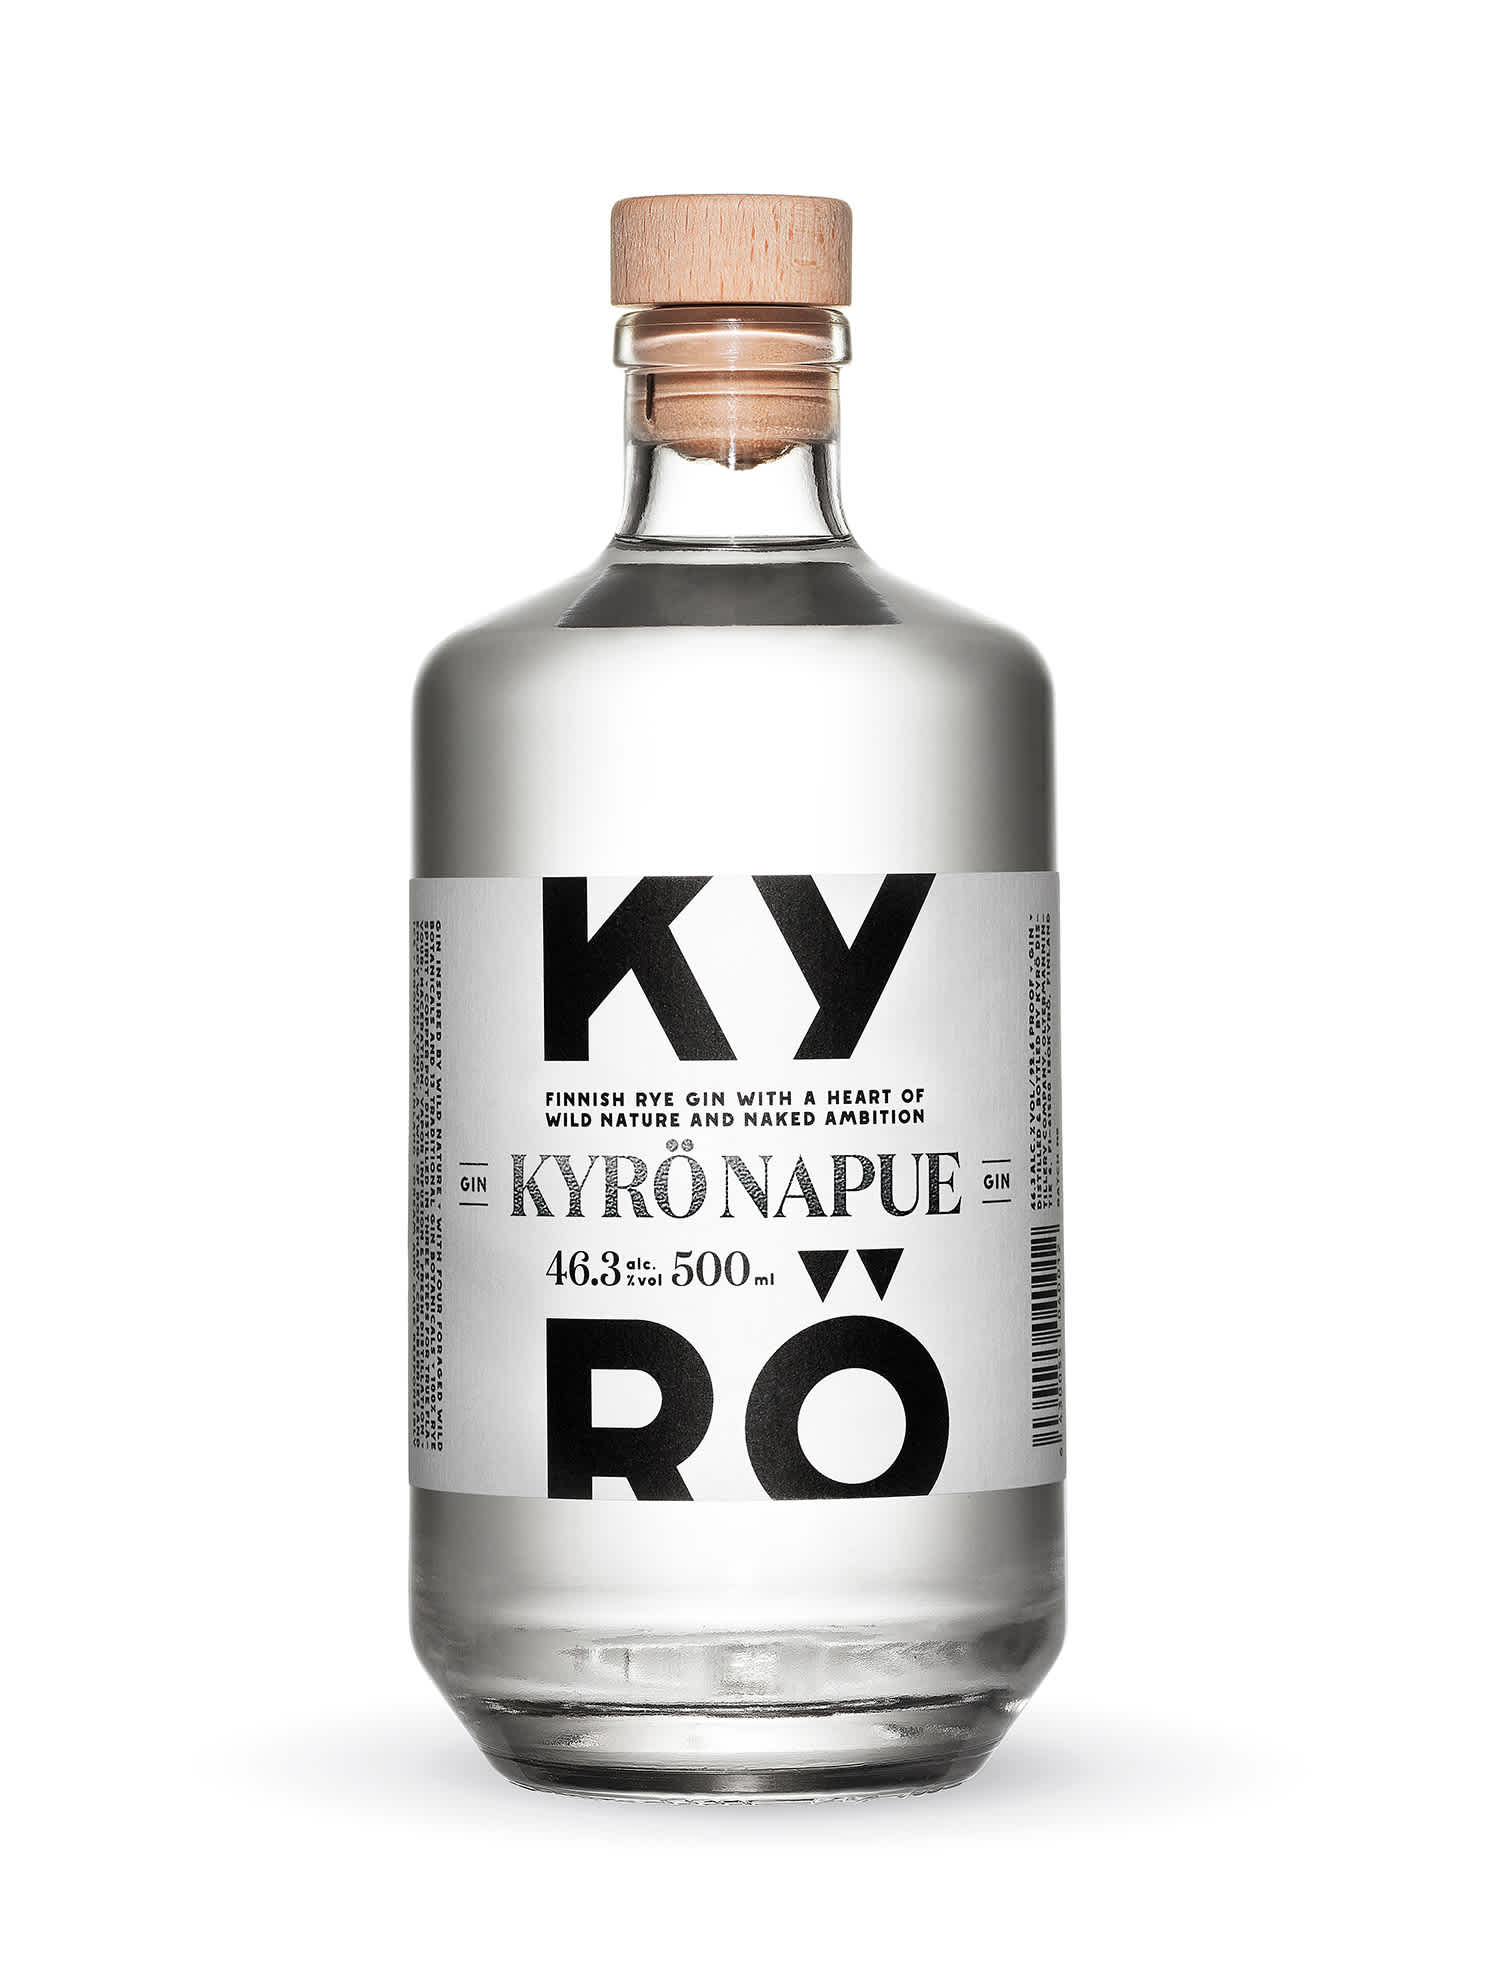 Product photo: a 500ml clear bottle of Kyrö Gin, which is clear in color, made by the Kyrö Distillery Company in Isokyrö, Finland. 